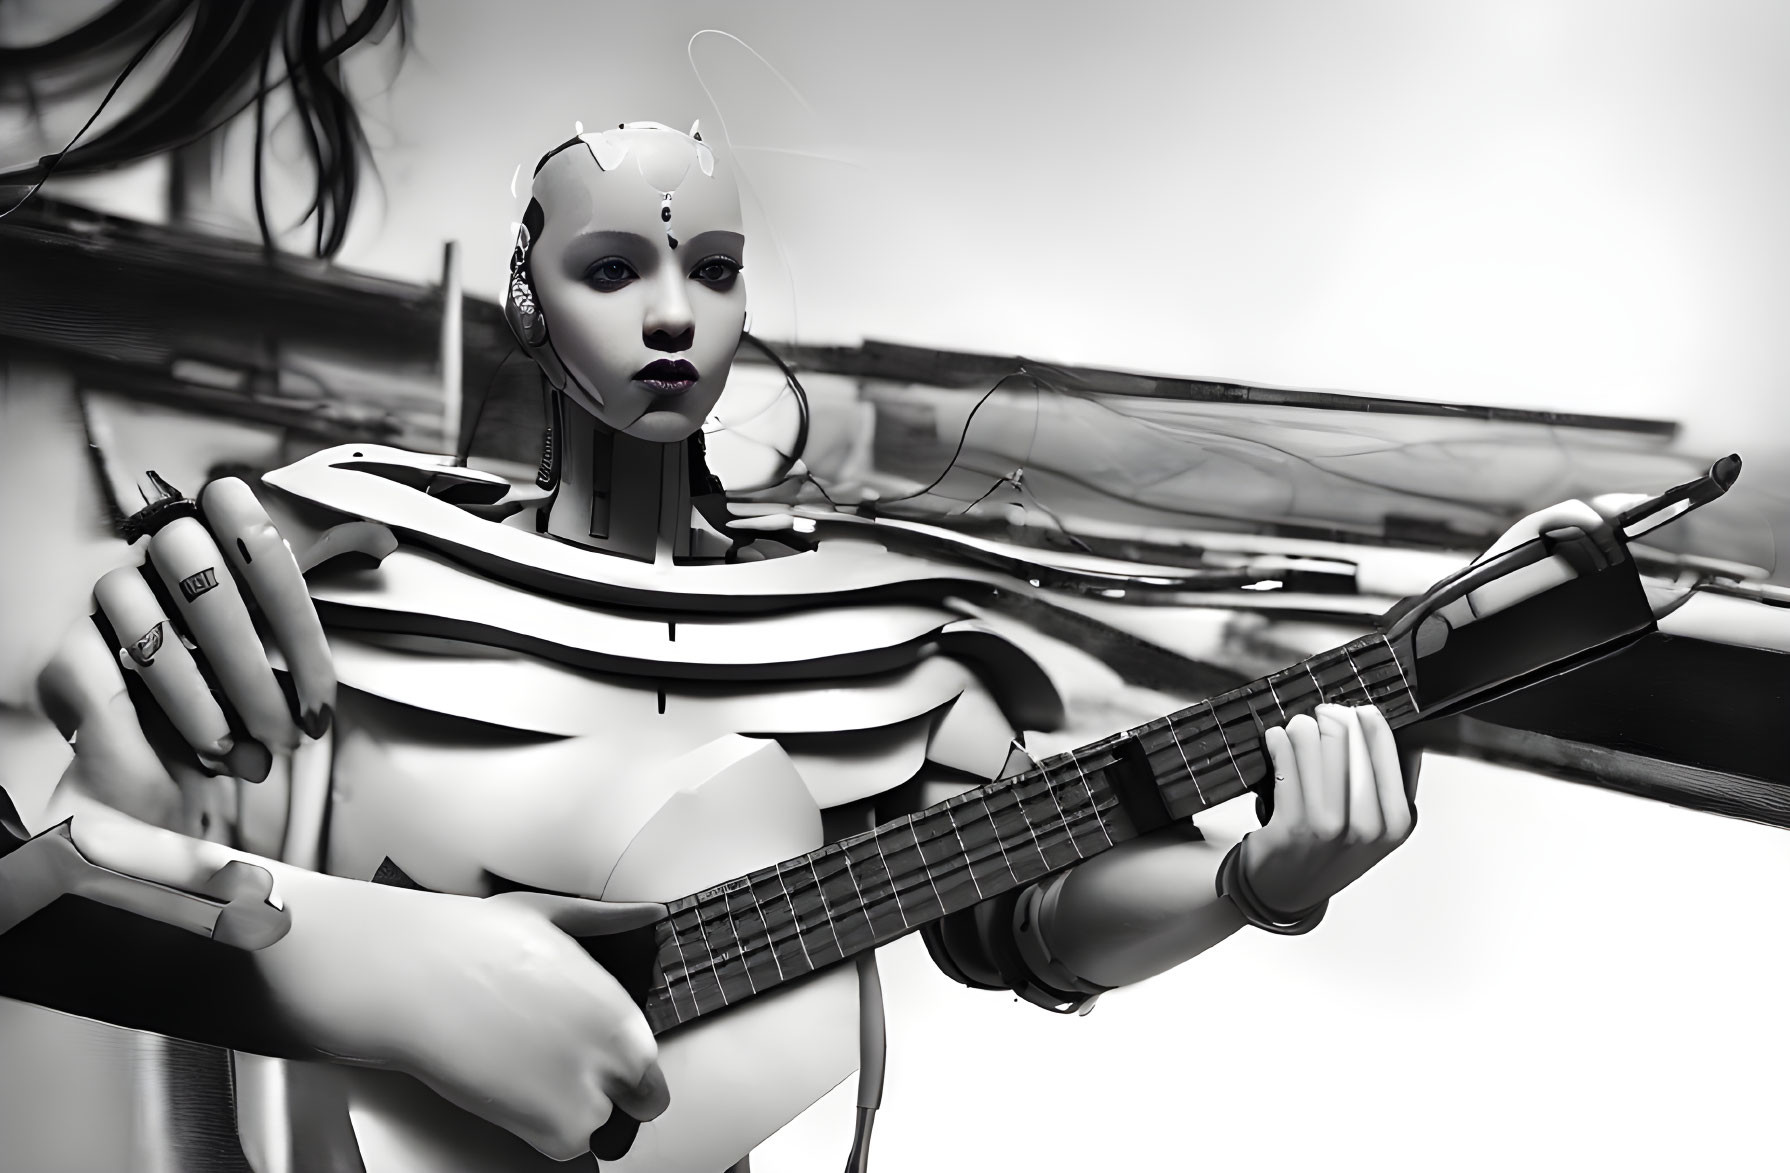 Monochrome humanoid robot playing electric guitar with wires on grey background